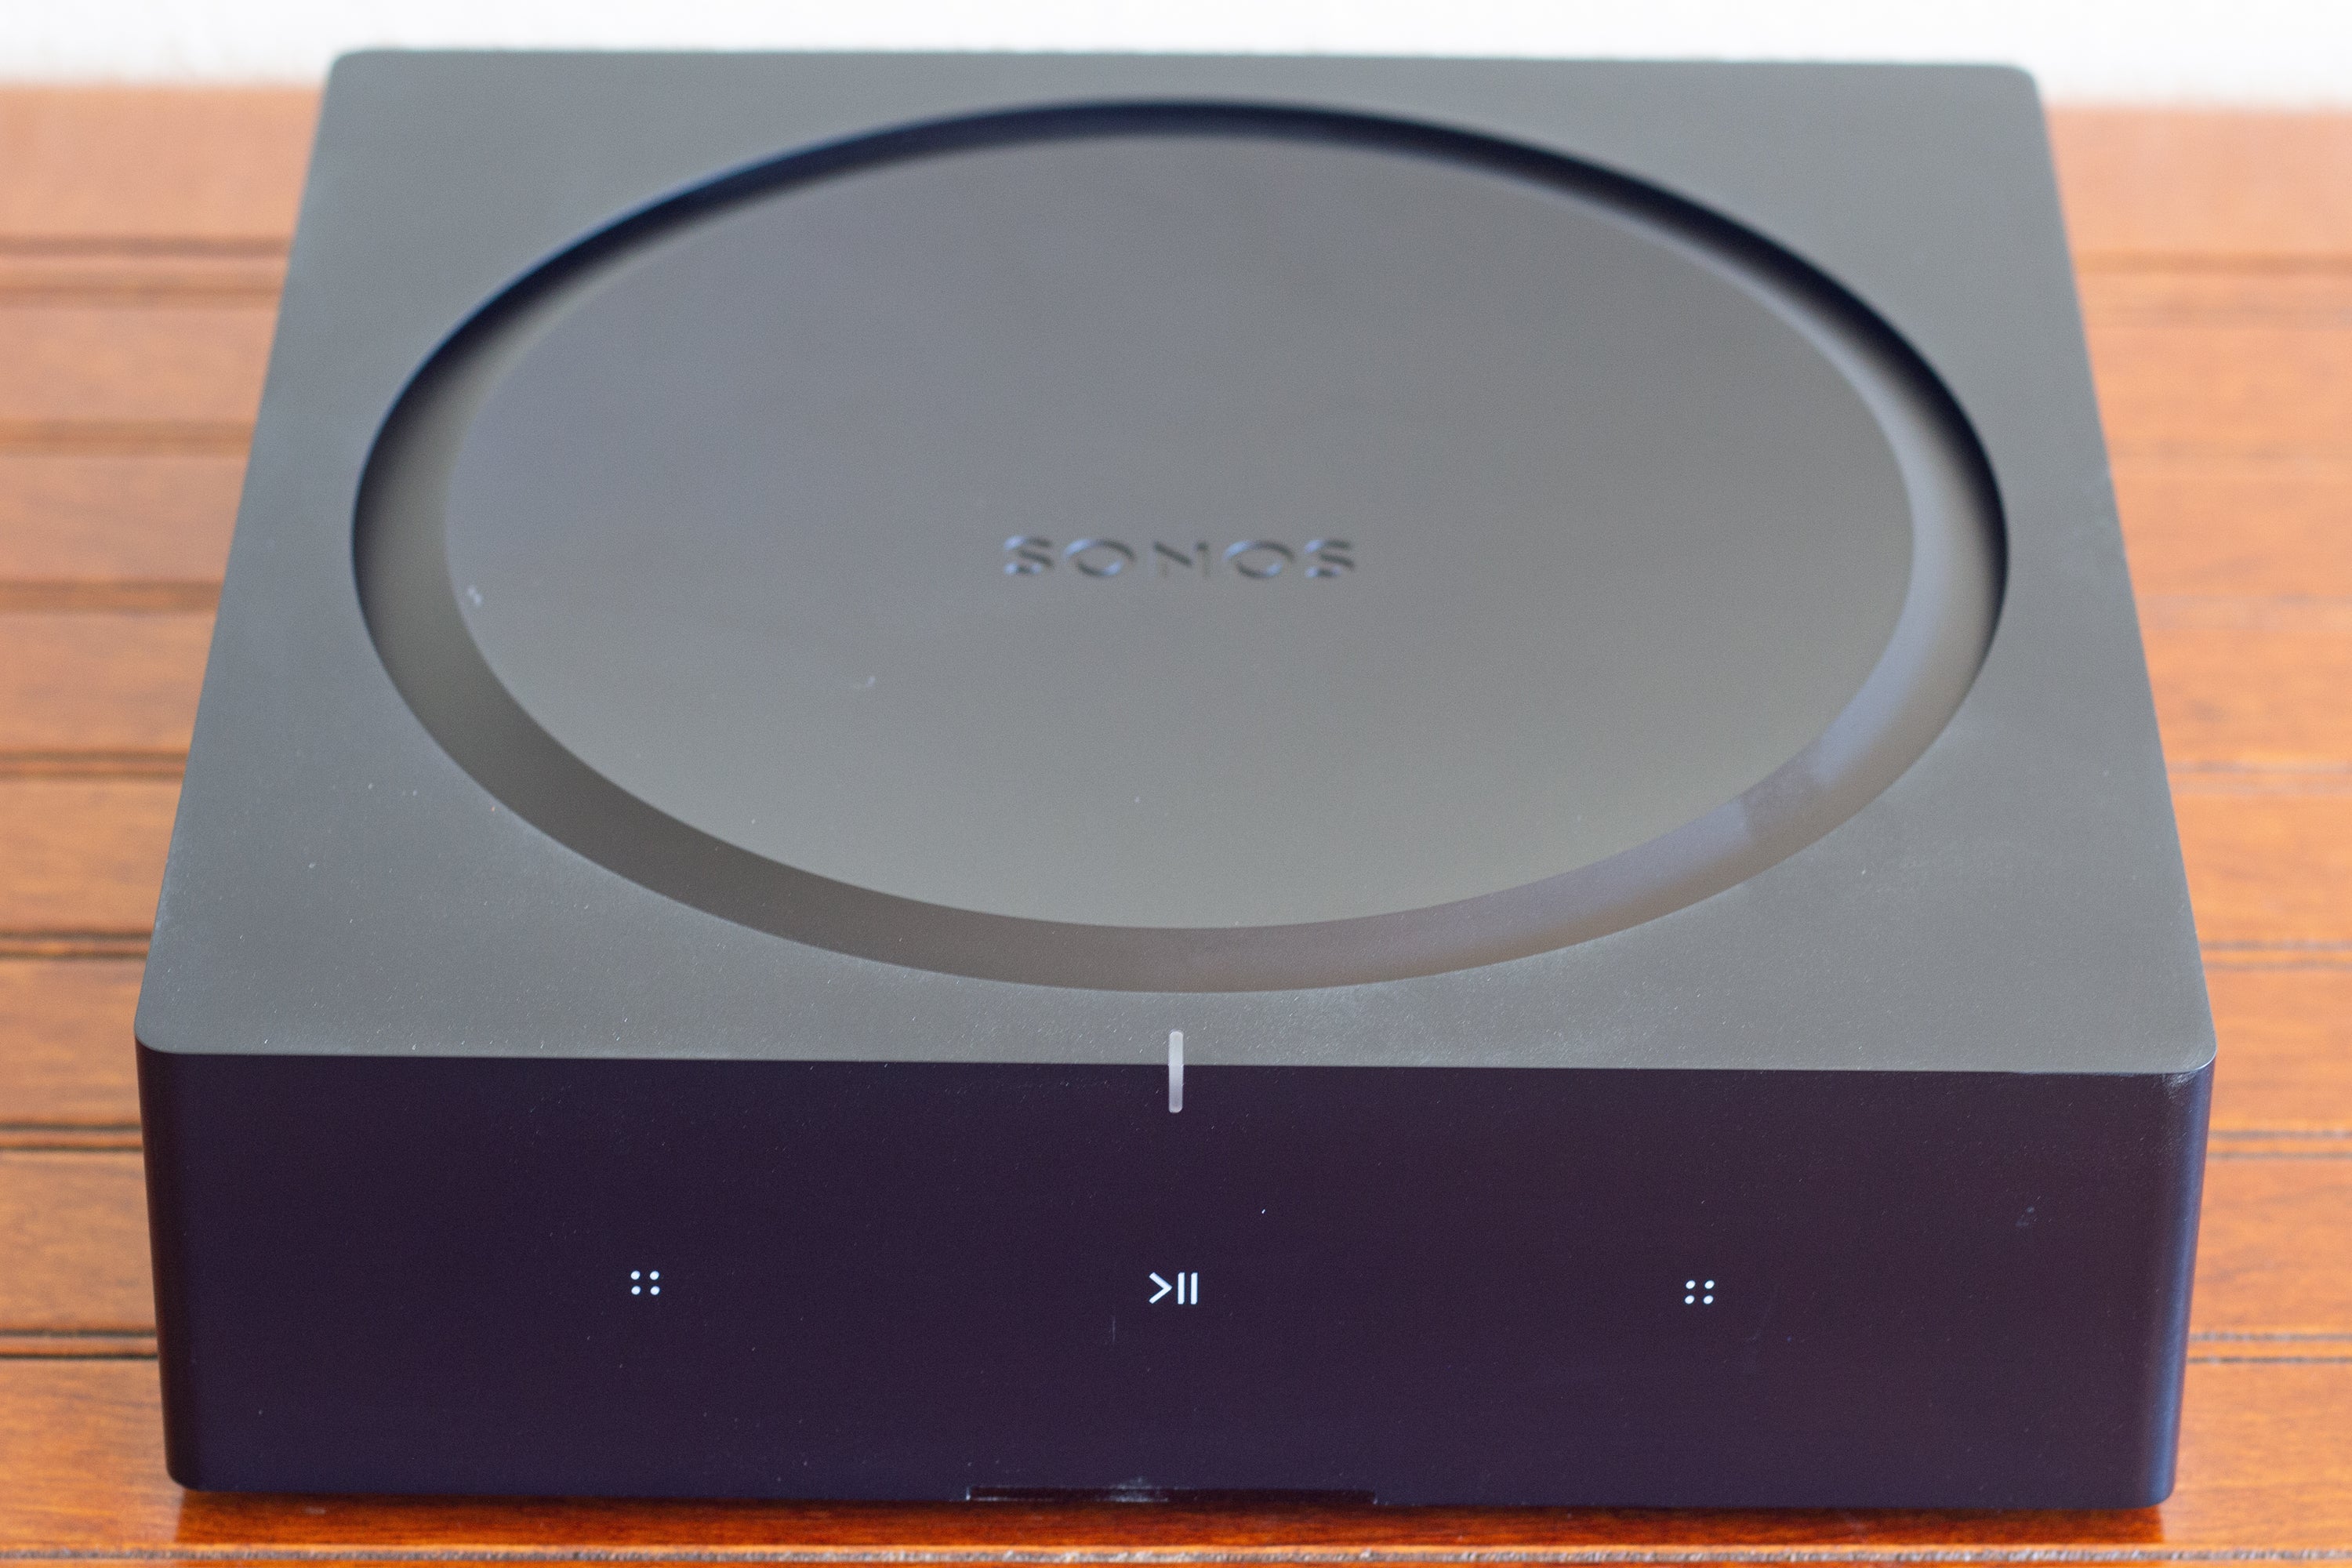 Sonos Amp Review This Is The Best Sonos Music Streamer By Far Even If It S Not Right For Everyone Techhive